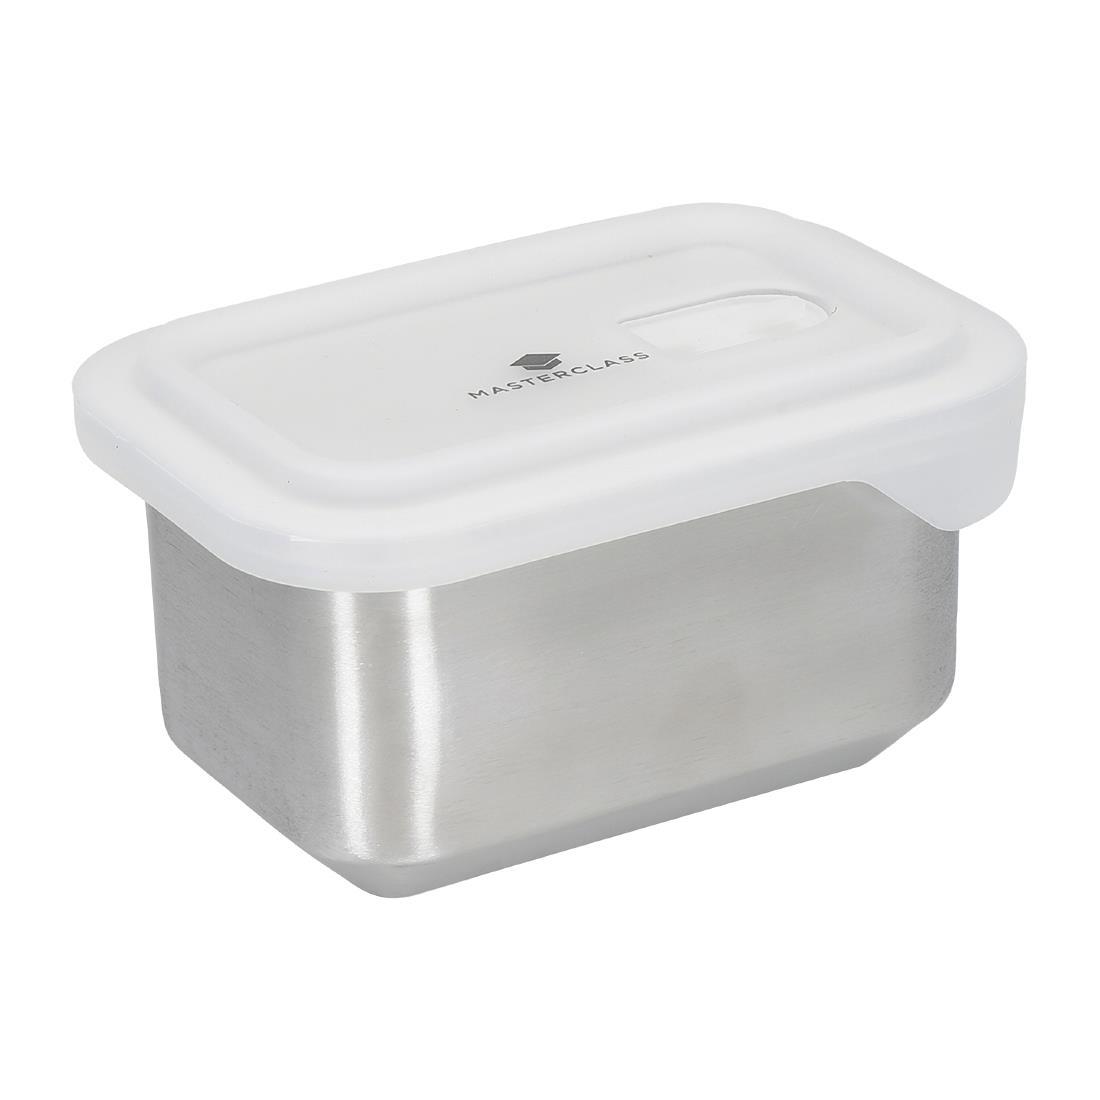 Masterclass All-in-One Stainless Steel Food Storage Dish 750ml - FW784  - 1